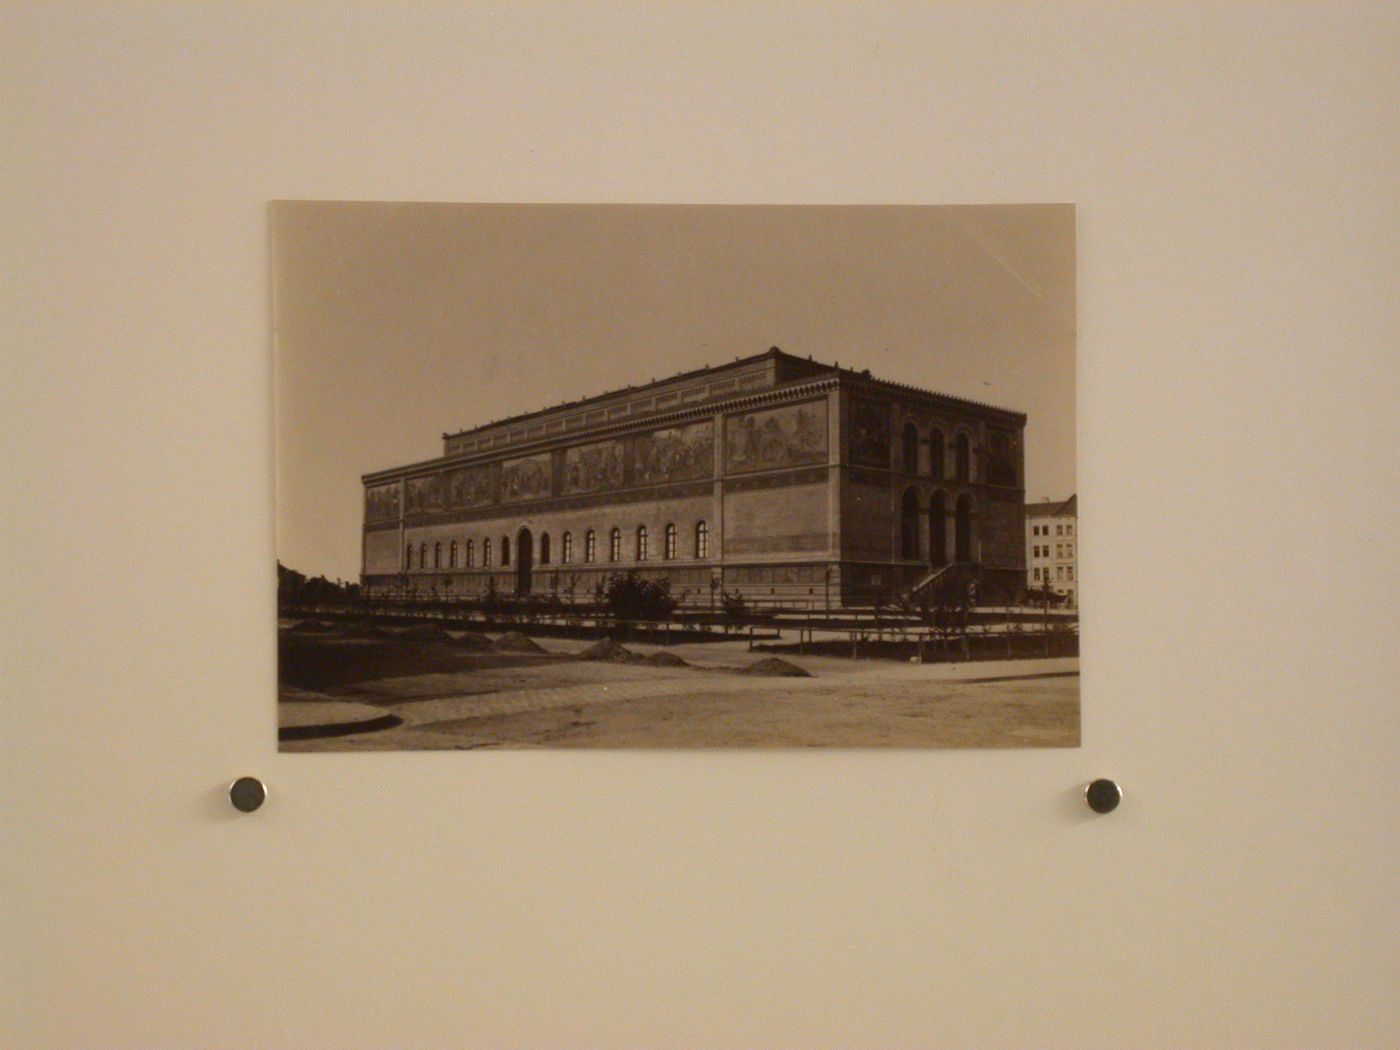 View of principal and lateral façades of the Neue Pinakothek [New Picture Gallery], Barerstrasse 29, Munich, Germany